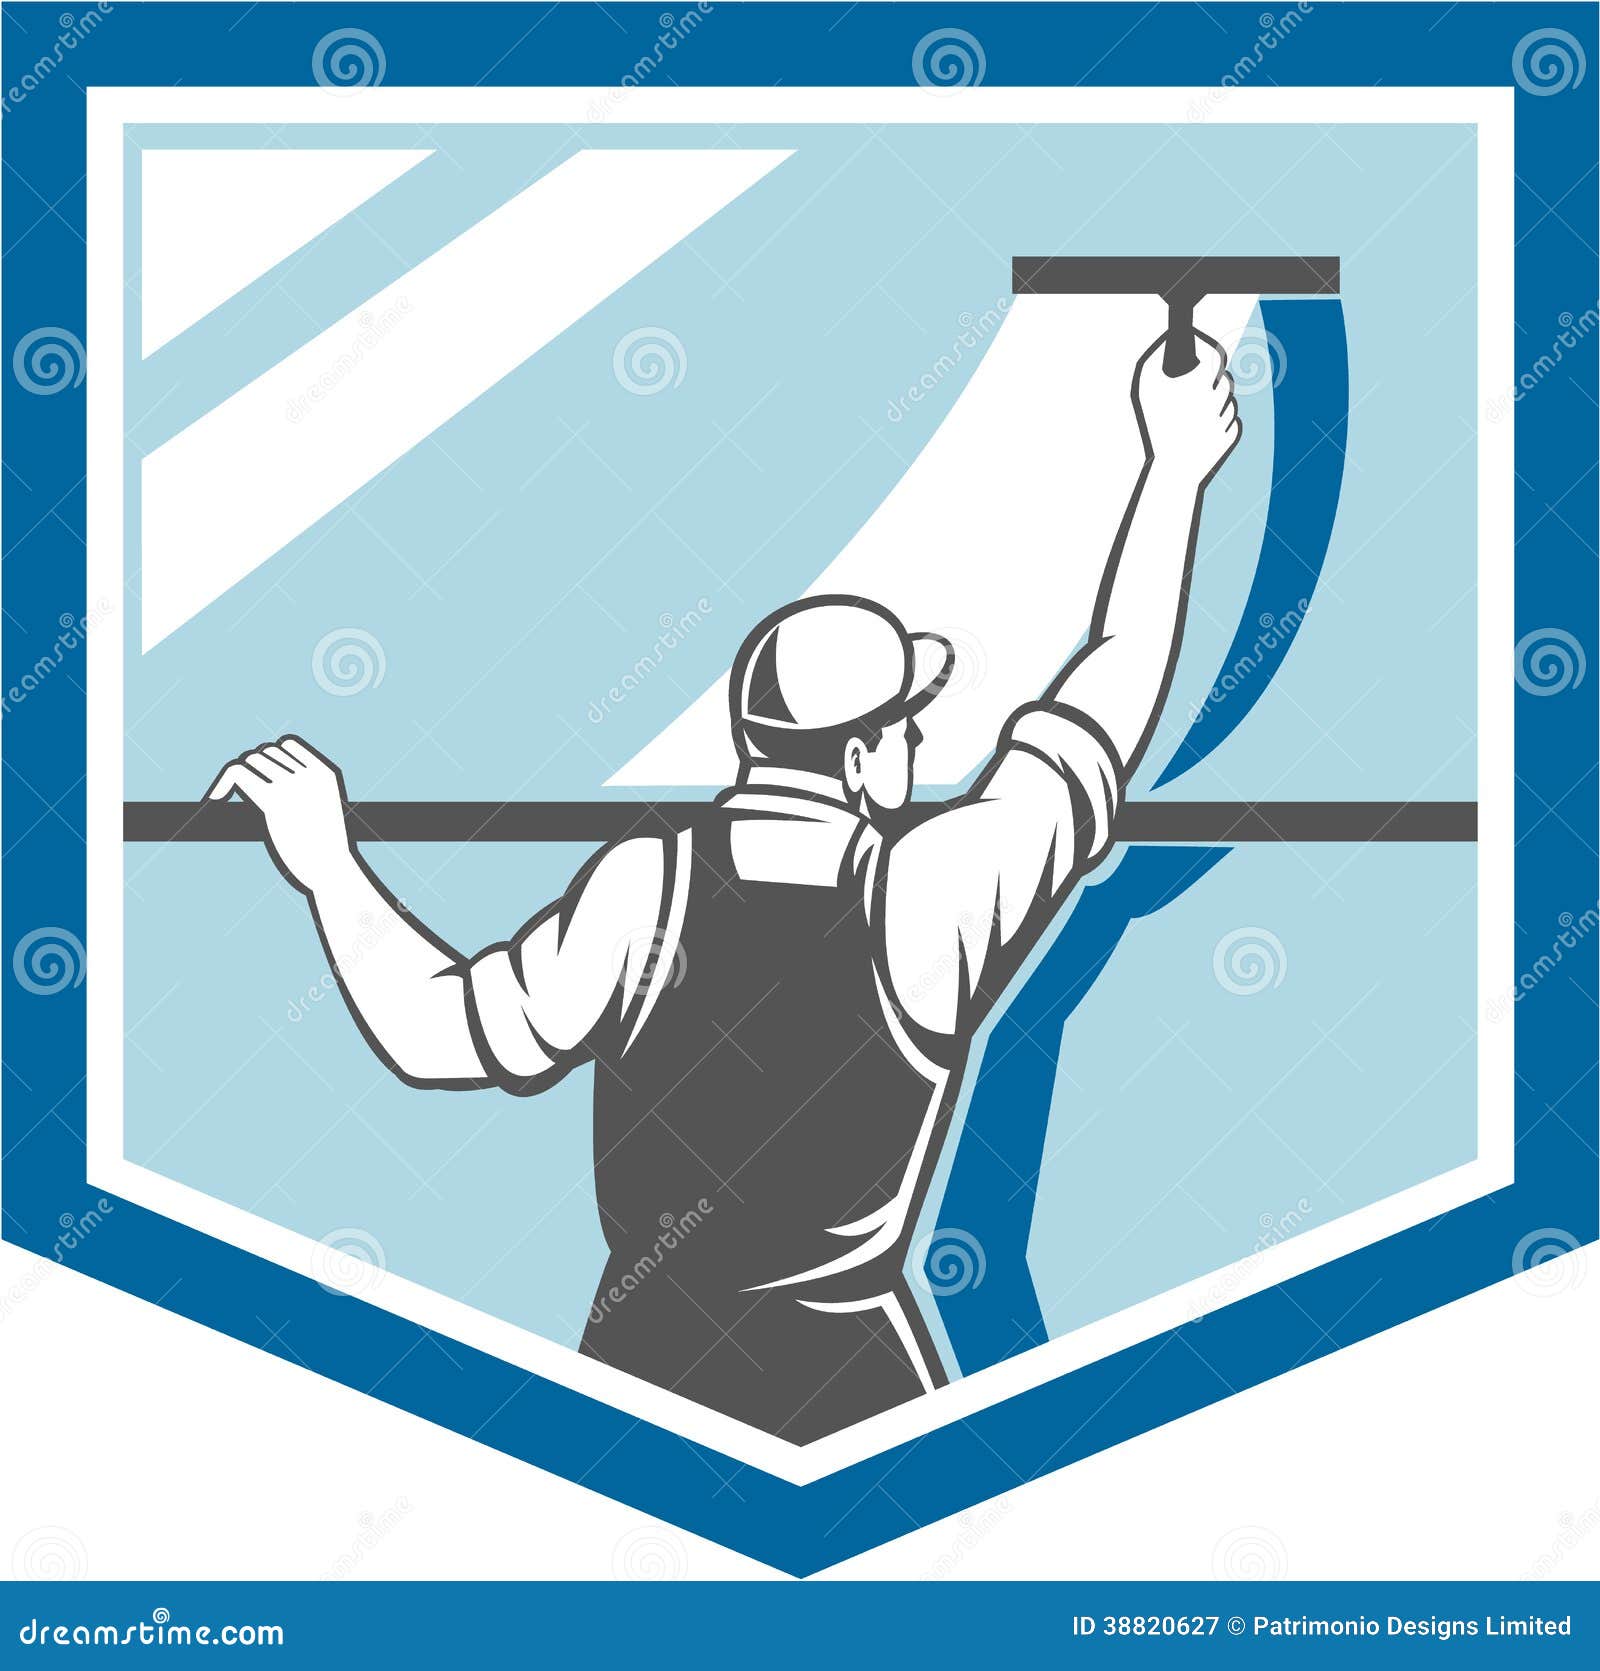 window cleaner clipart - photo #9